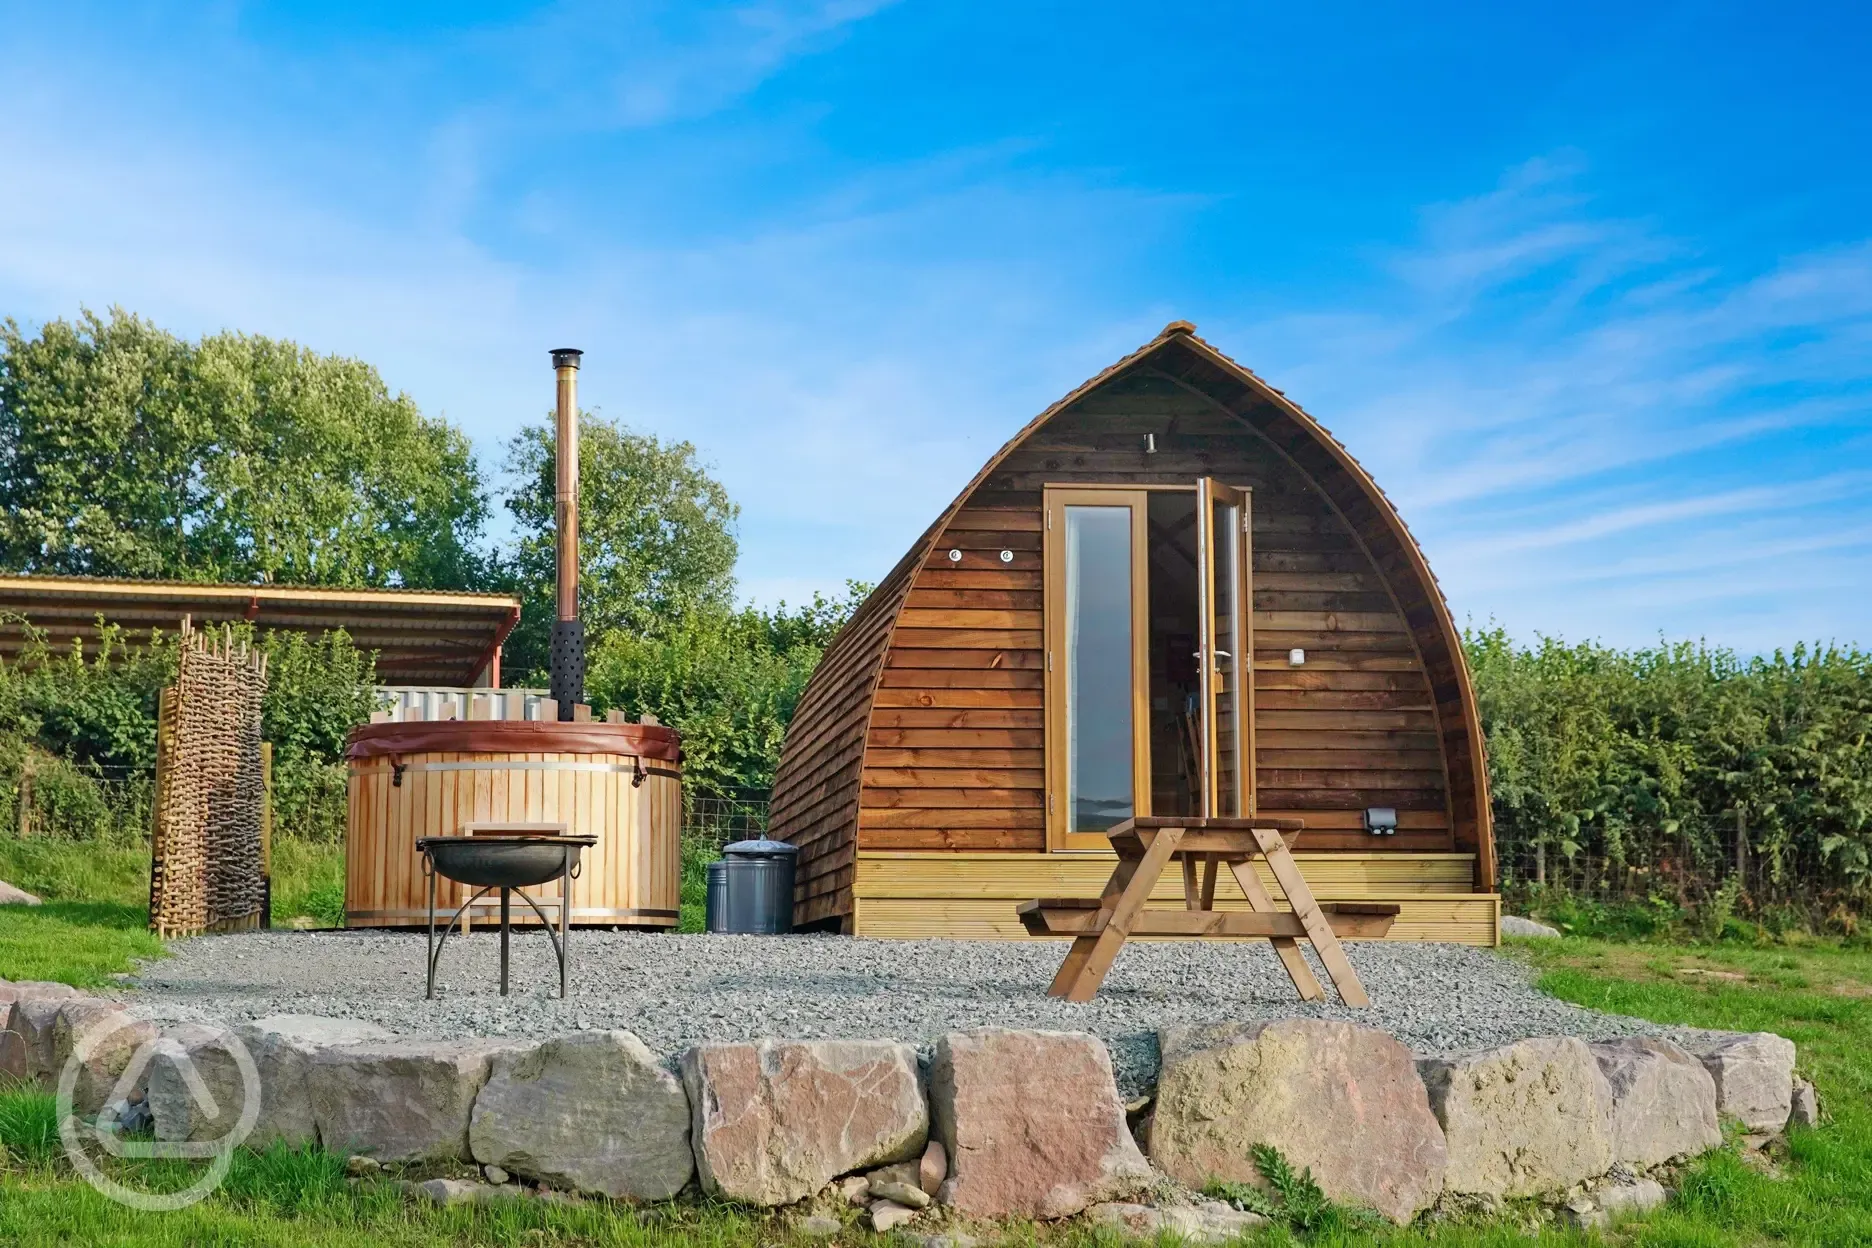 Deluxe Wigwam pod with hot tub